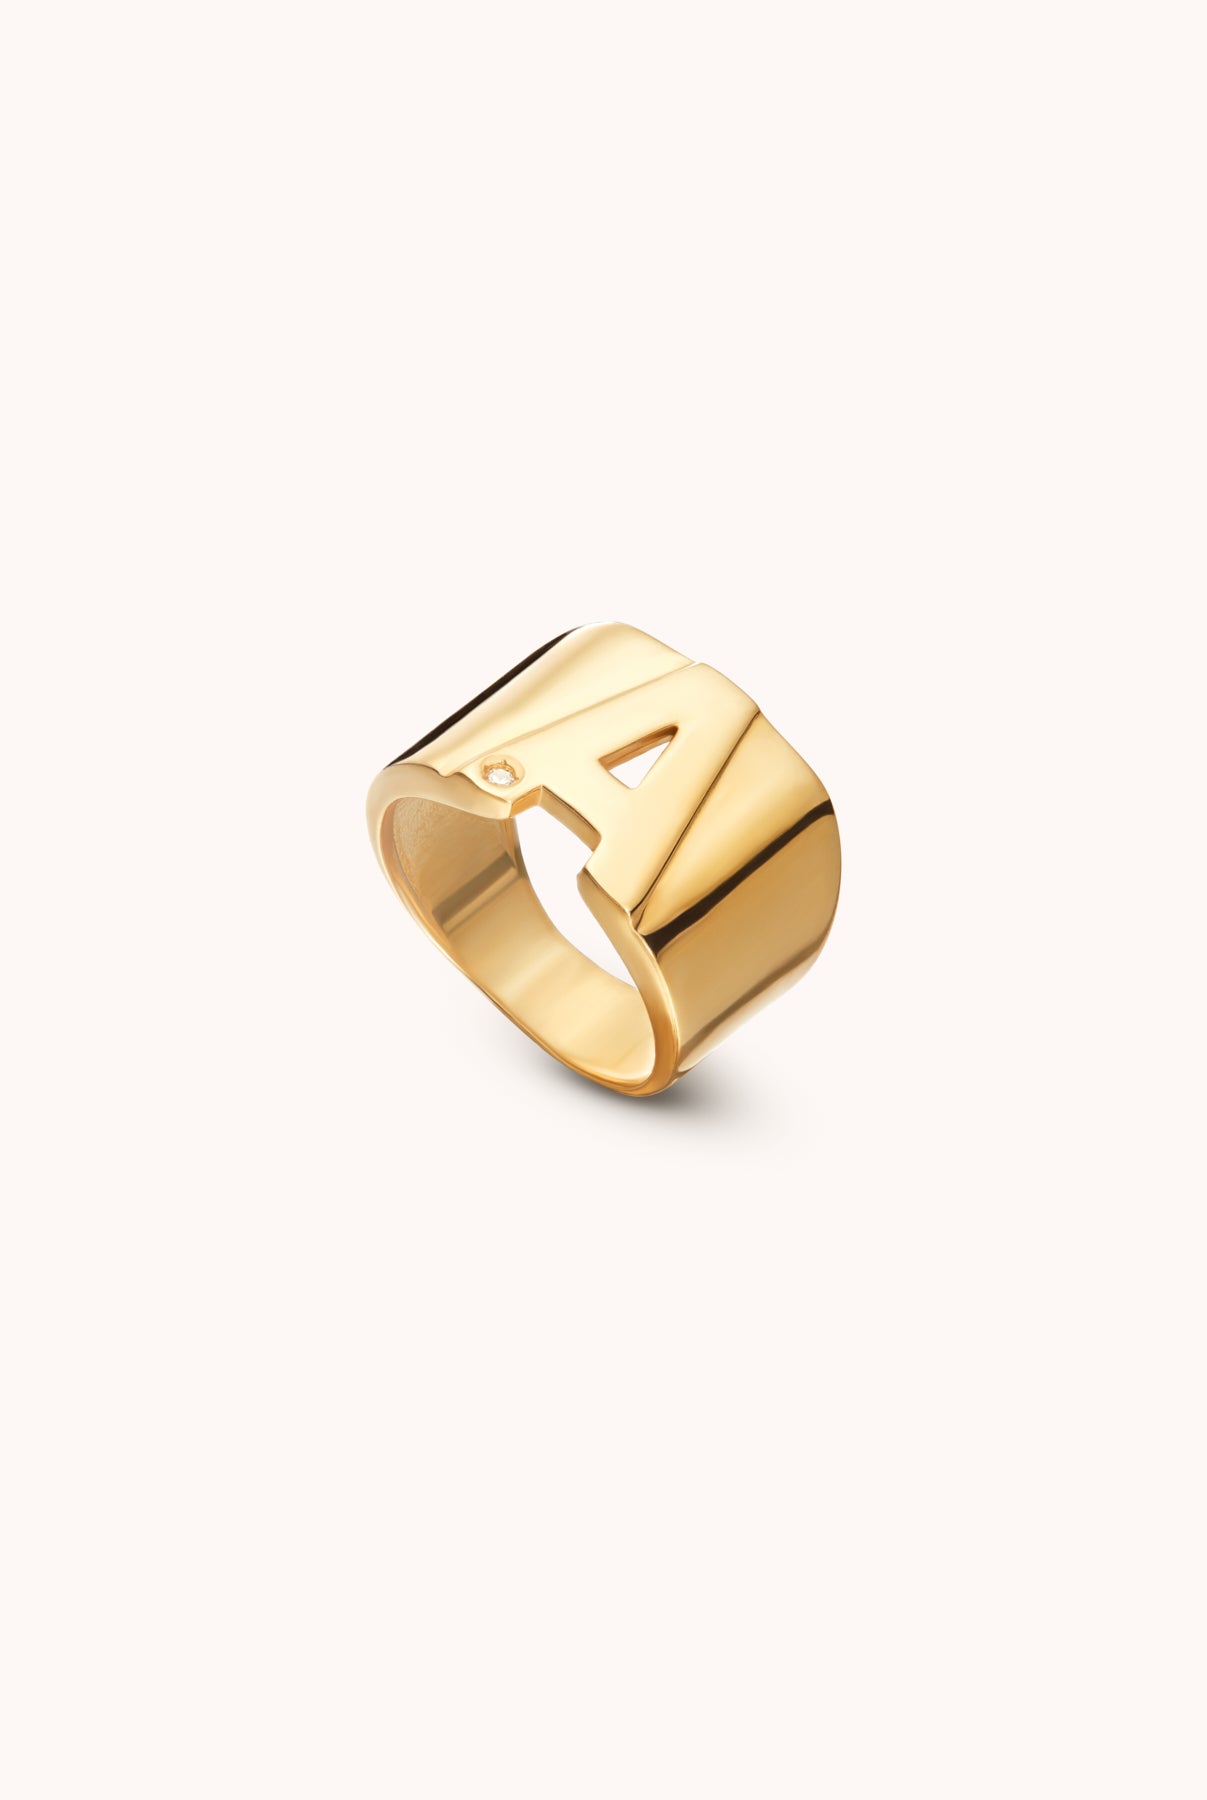 GOLD INITIAL SILHOUETTE RING